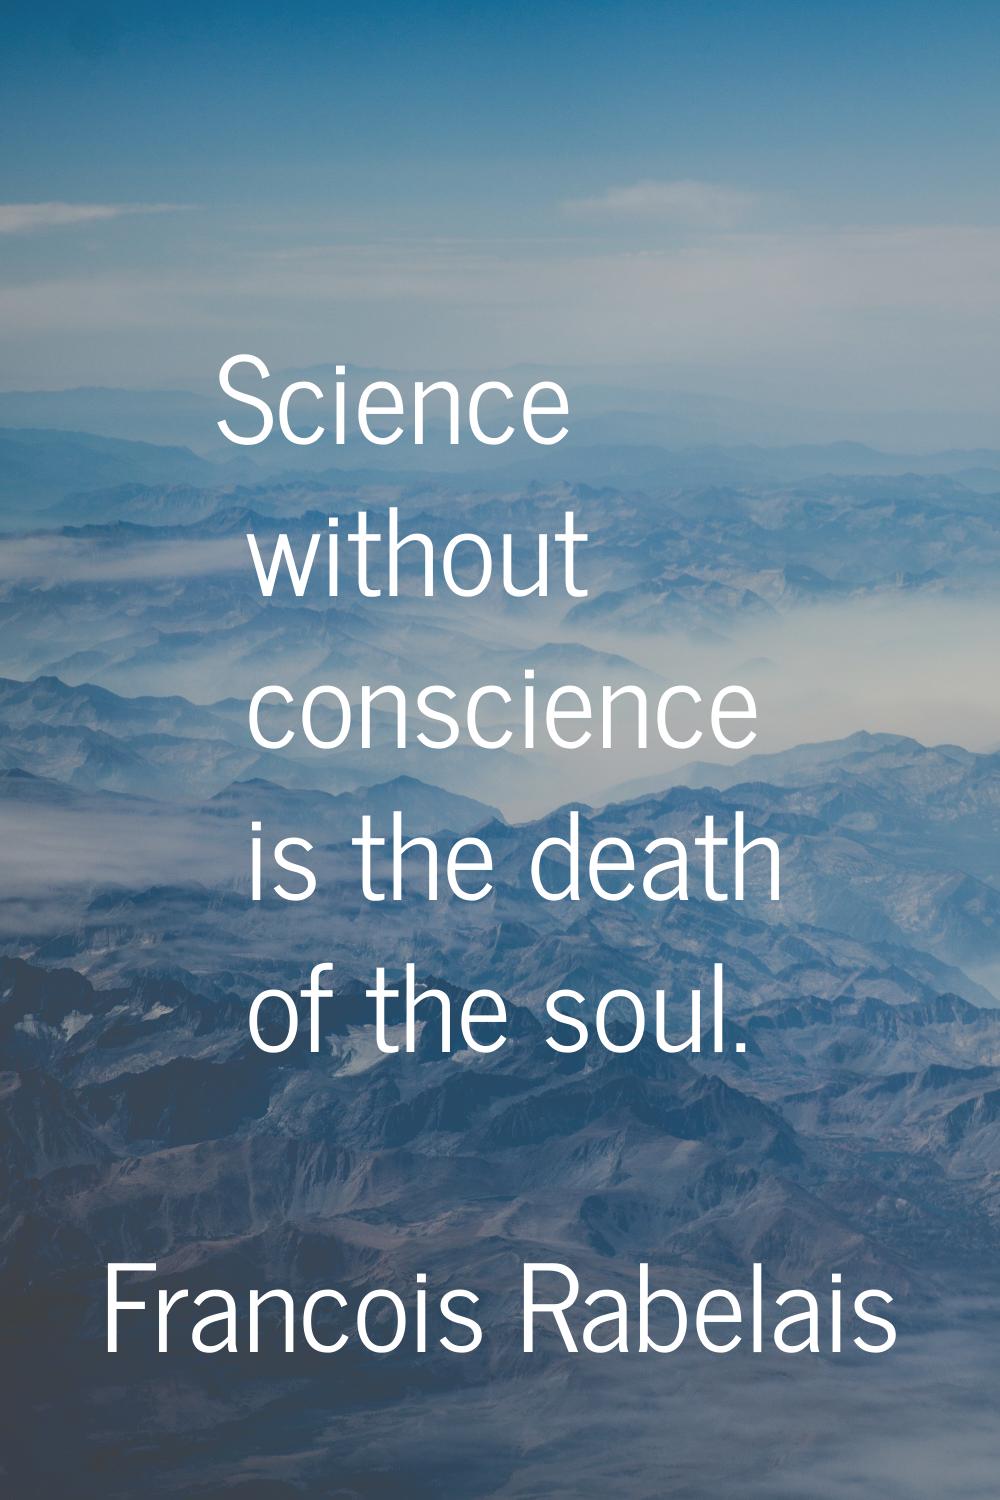 Science without conscience is the death of the soul.